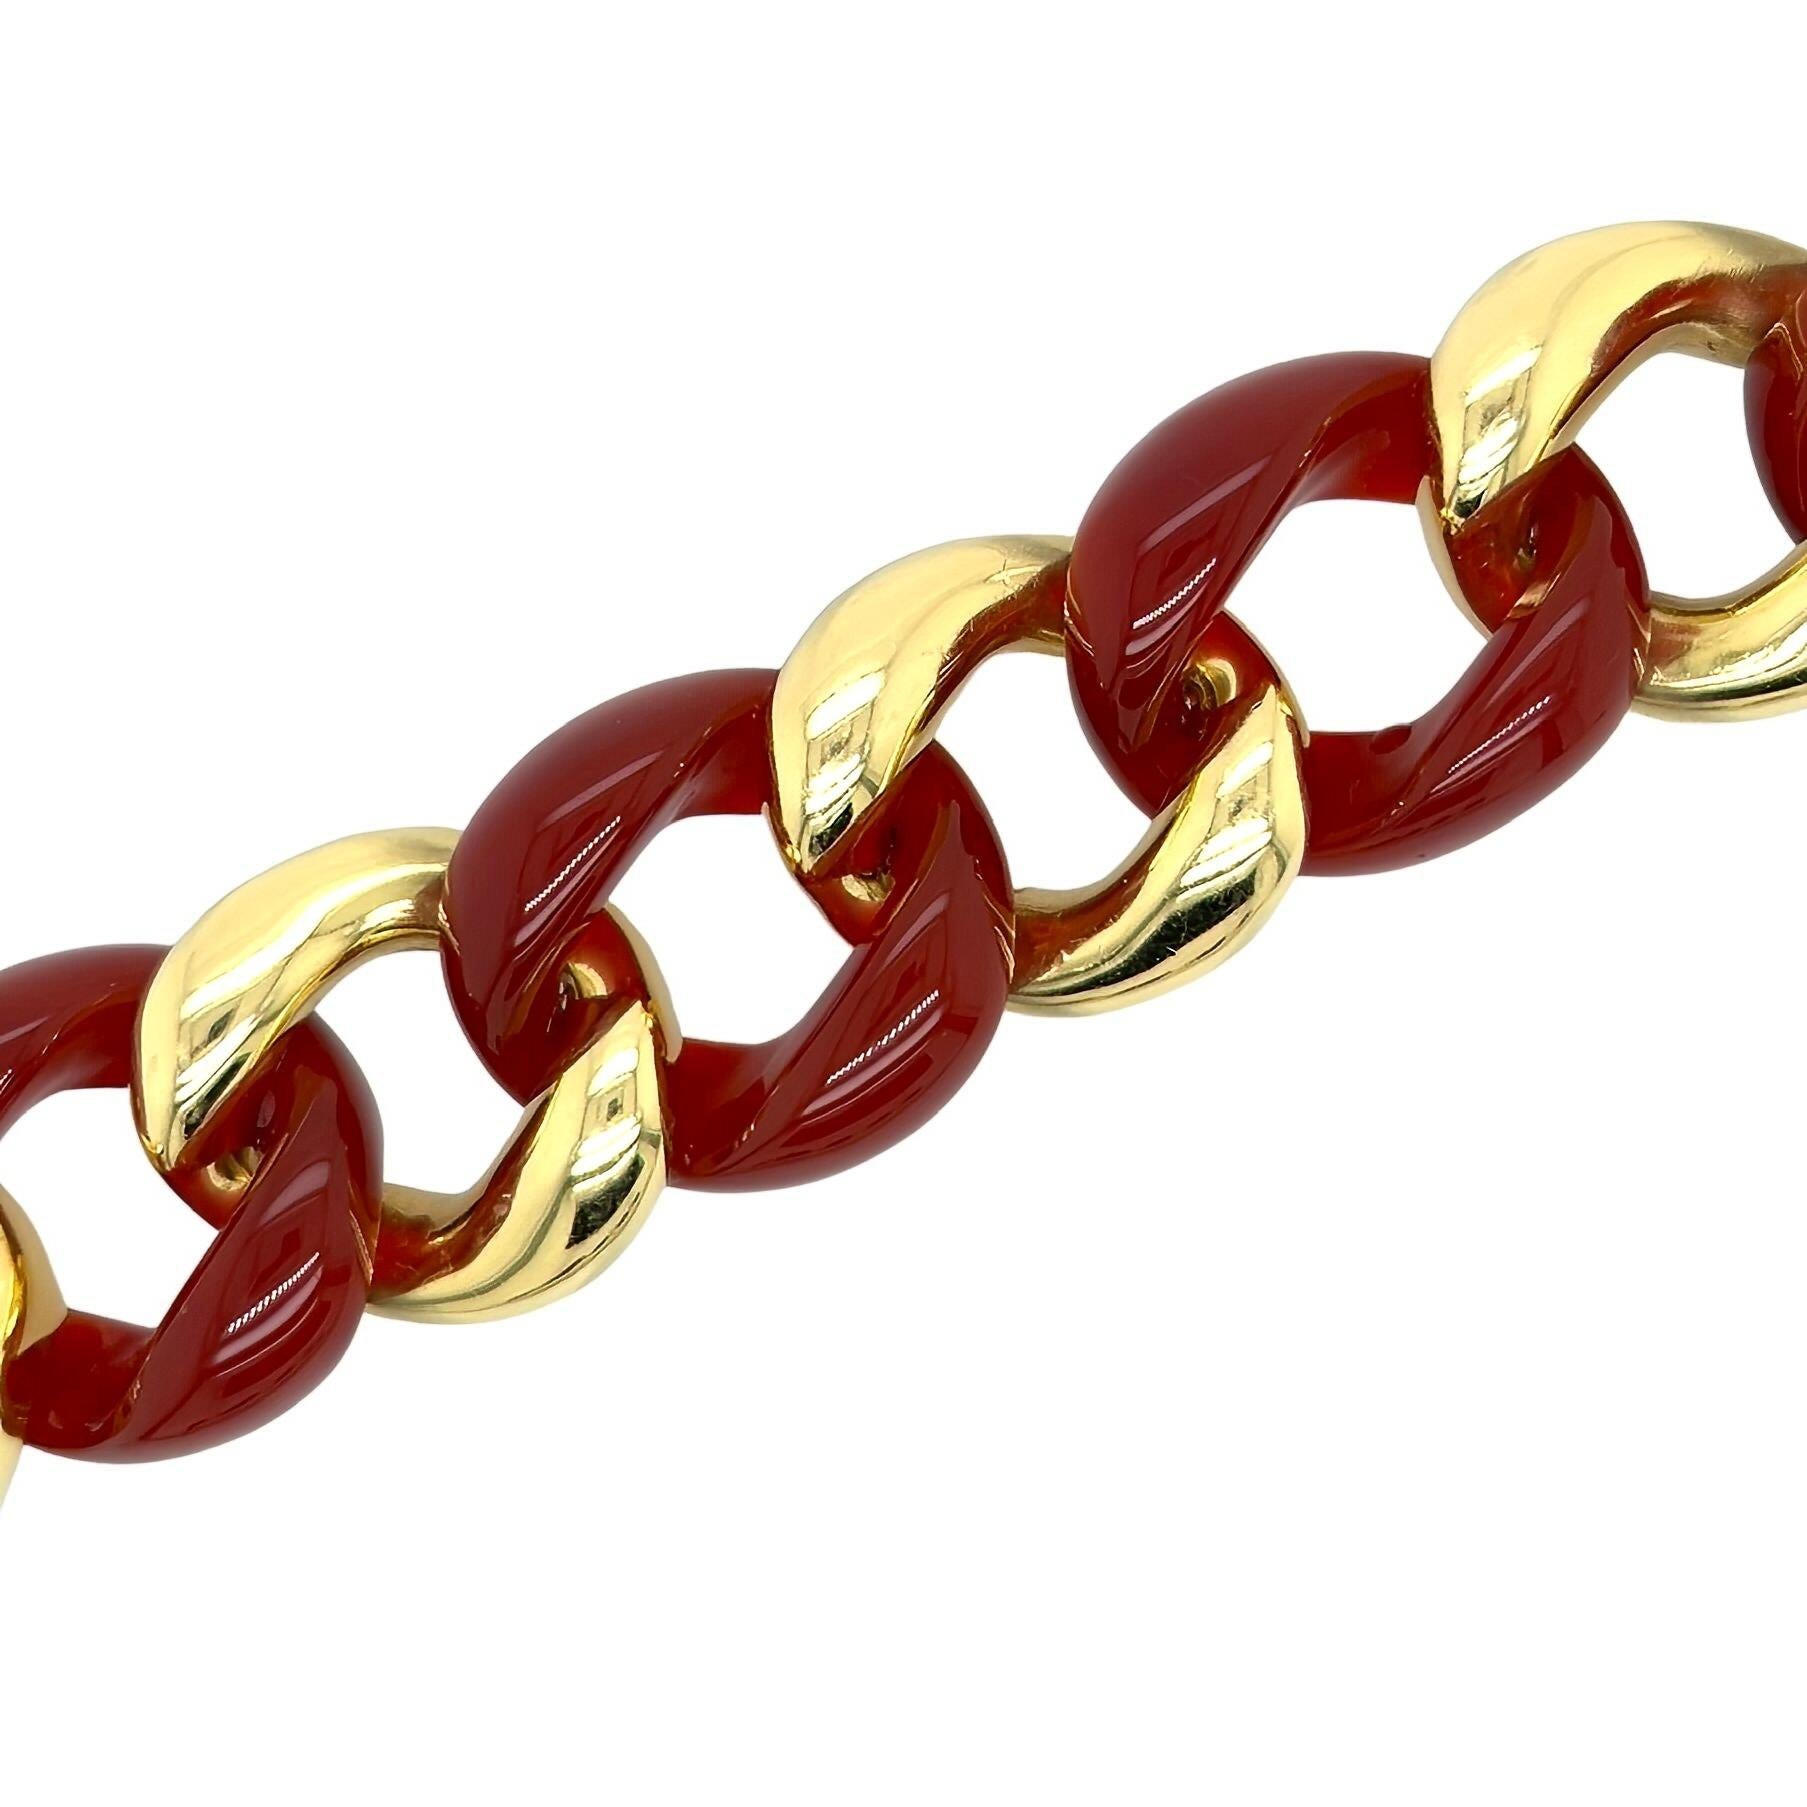 An 18 karat yellow gold and carnelian bracelet, Seaman Schepps.  Designed as a large link bracelet of alternating carnelian and gold curb links.  Length approximately 8 inches.  Gross weight approximately 106.60 grams.  Signed Seaman Schepps with